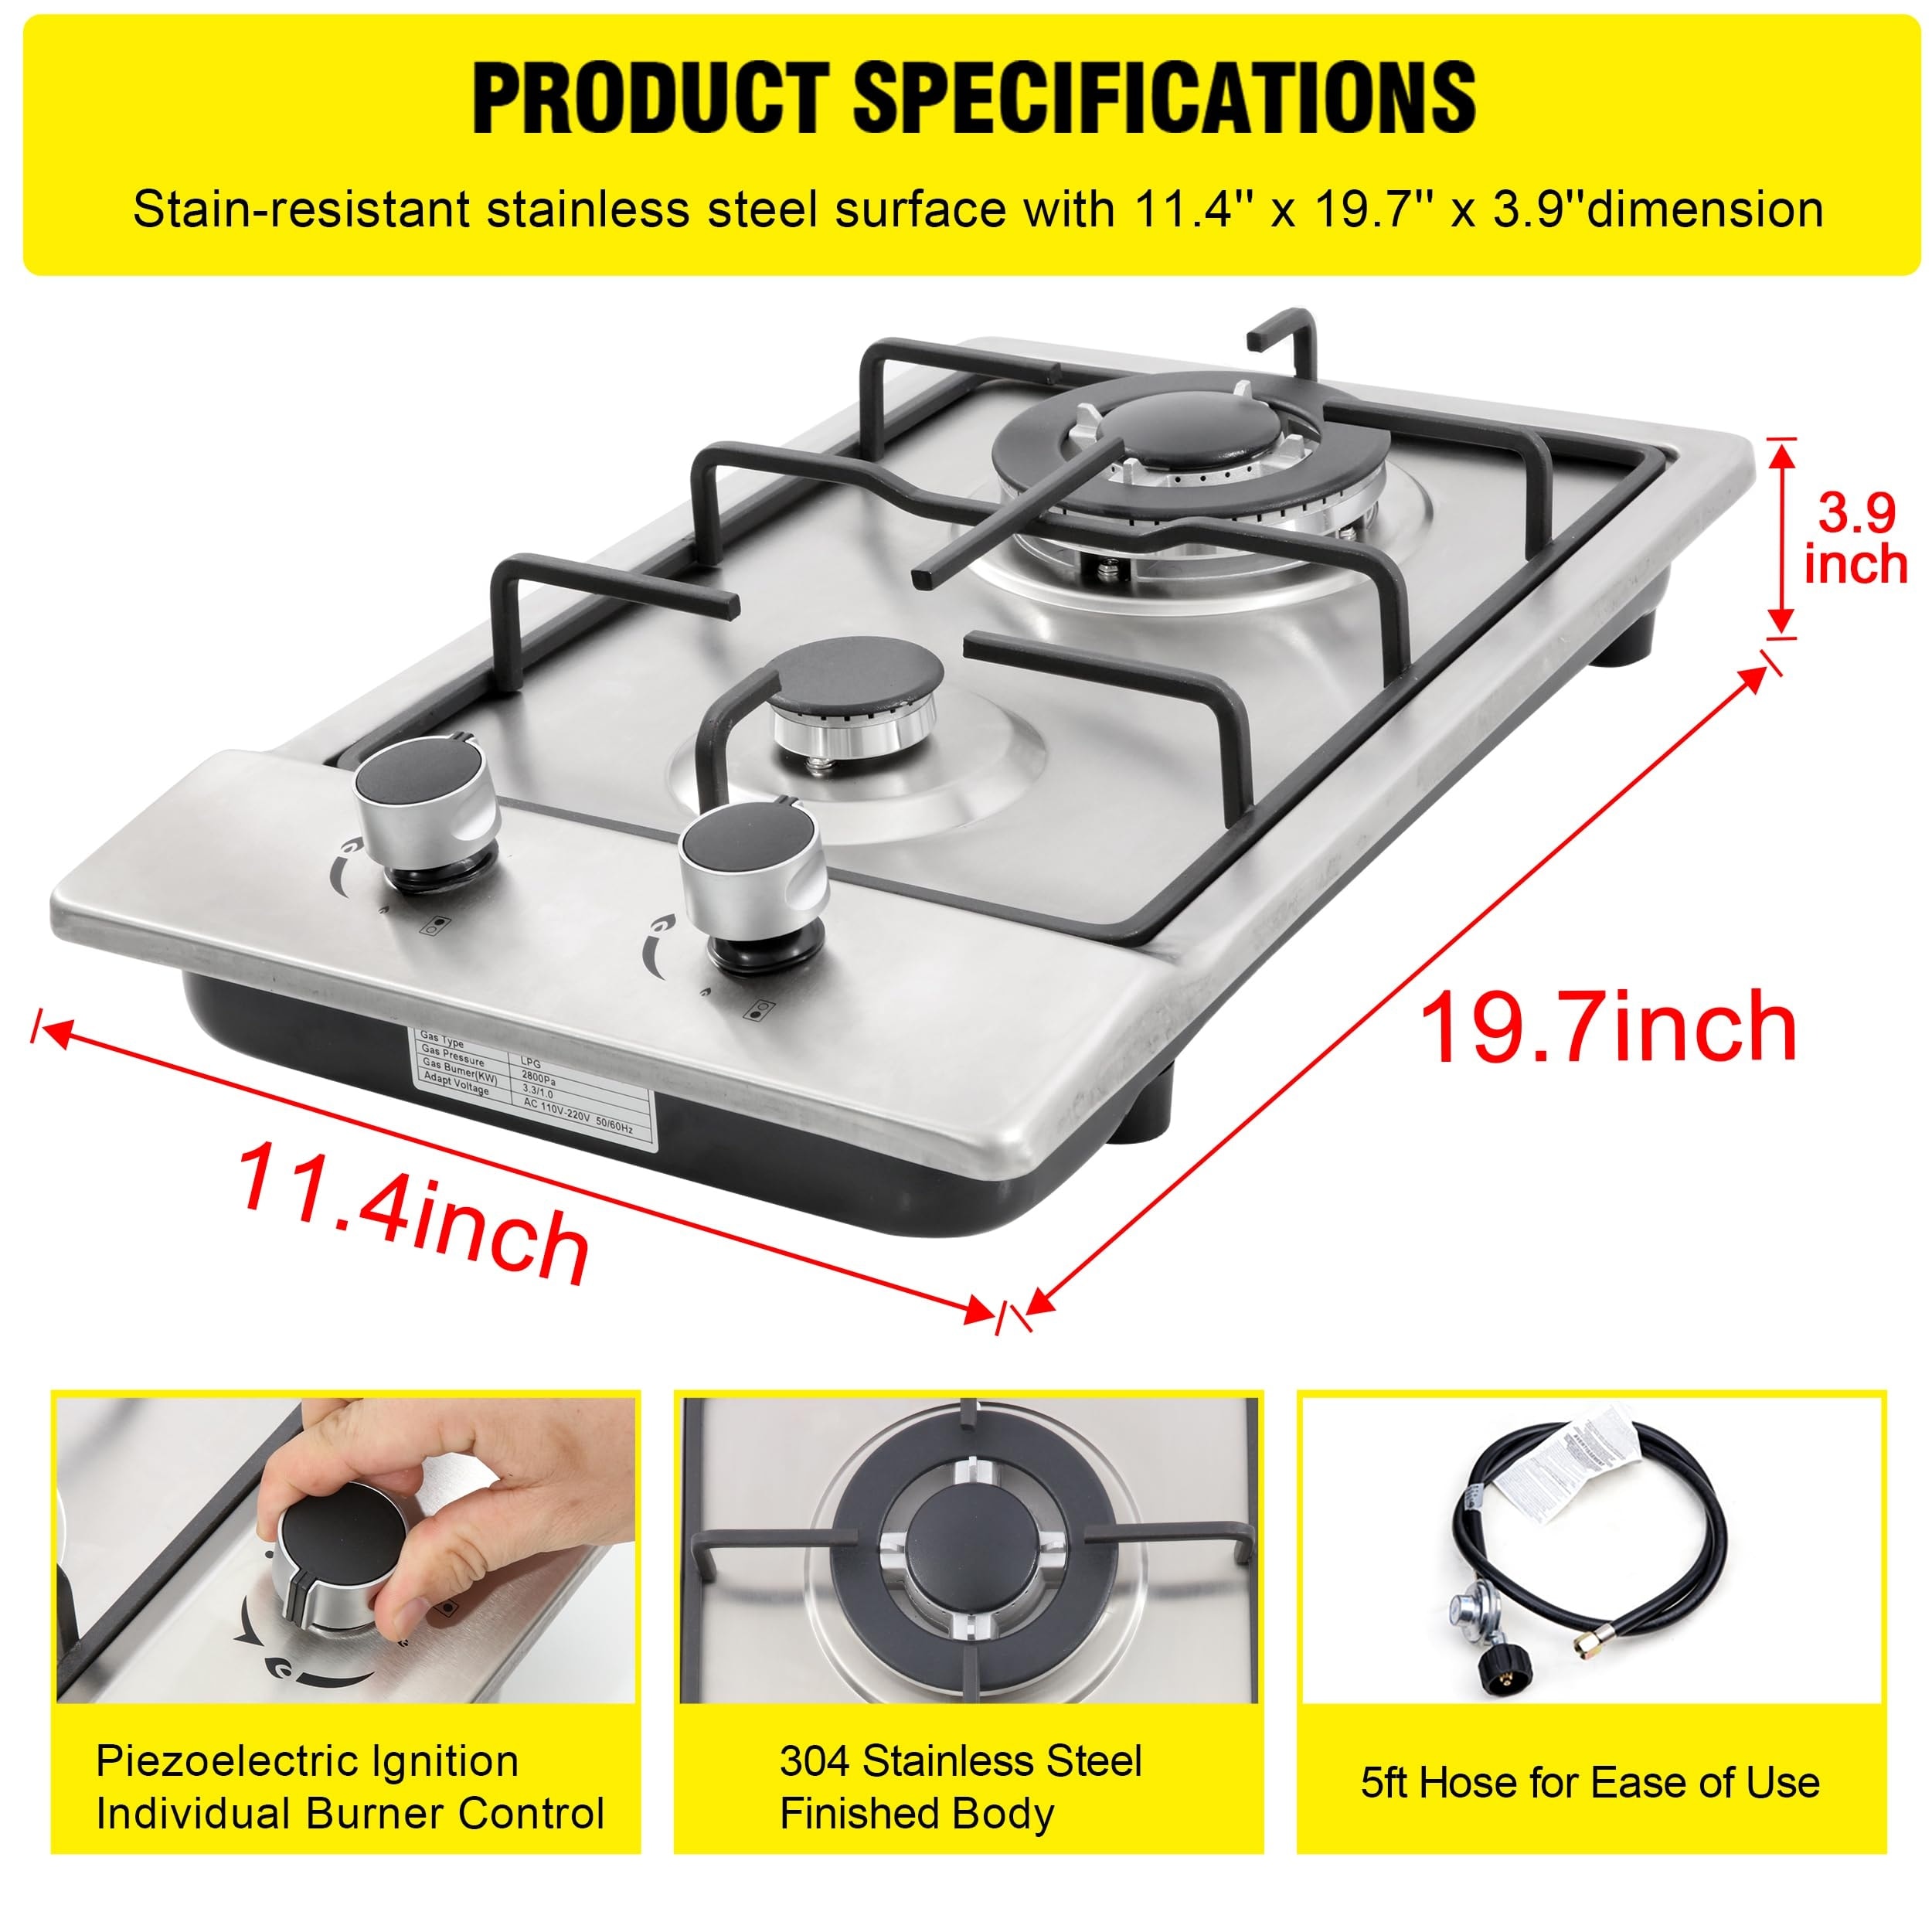 Eascookchef 30 inch Gas Cooktop, Gas Stove Top with 5 High Efficiency  Burners, Bulit-in Stainless Steel Gas Hob for Kitchen, NG/LPG Convertible  Gas